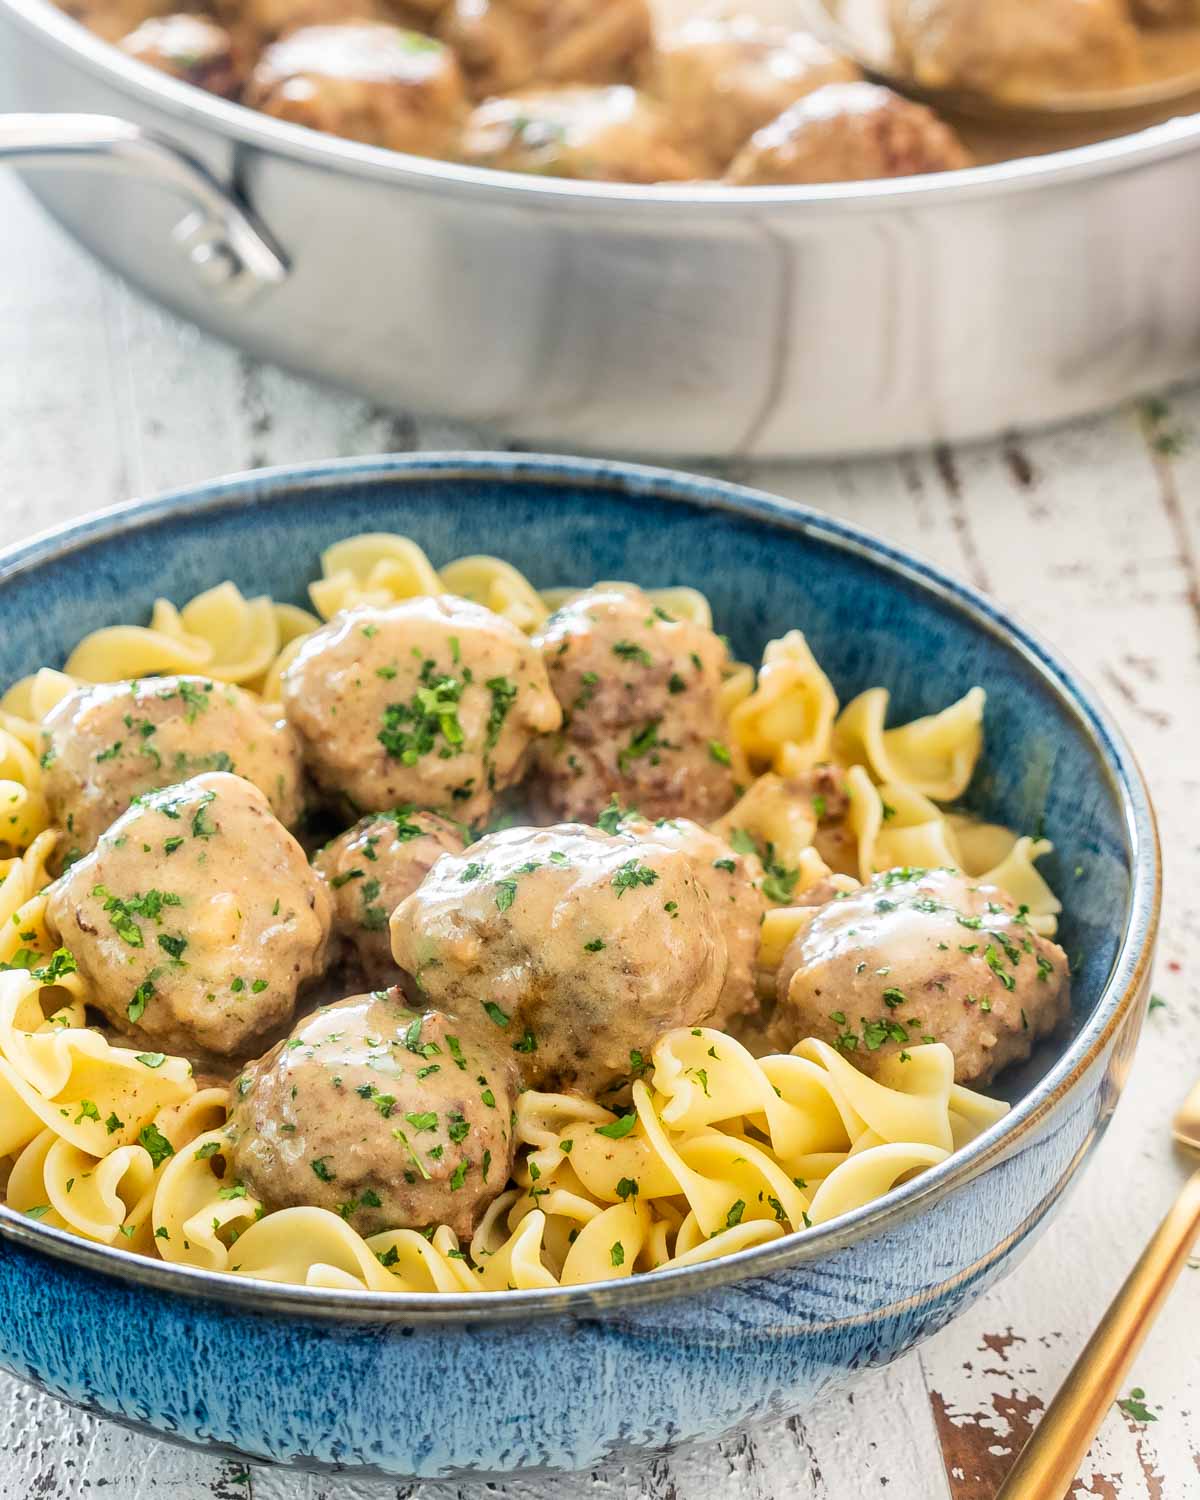 swedish meatballs with gravy over noodles in a blue bowl.